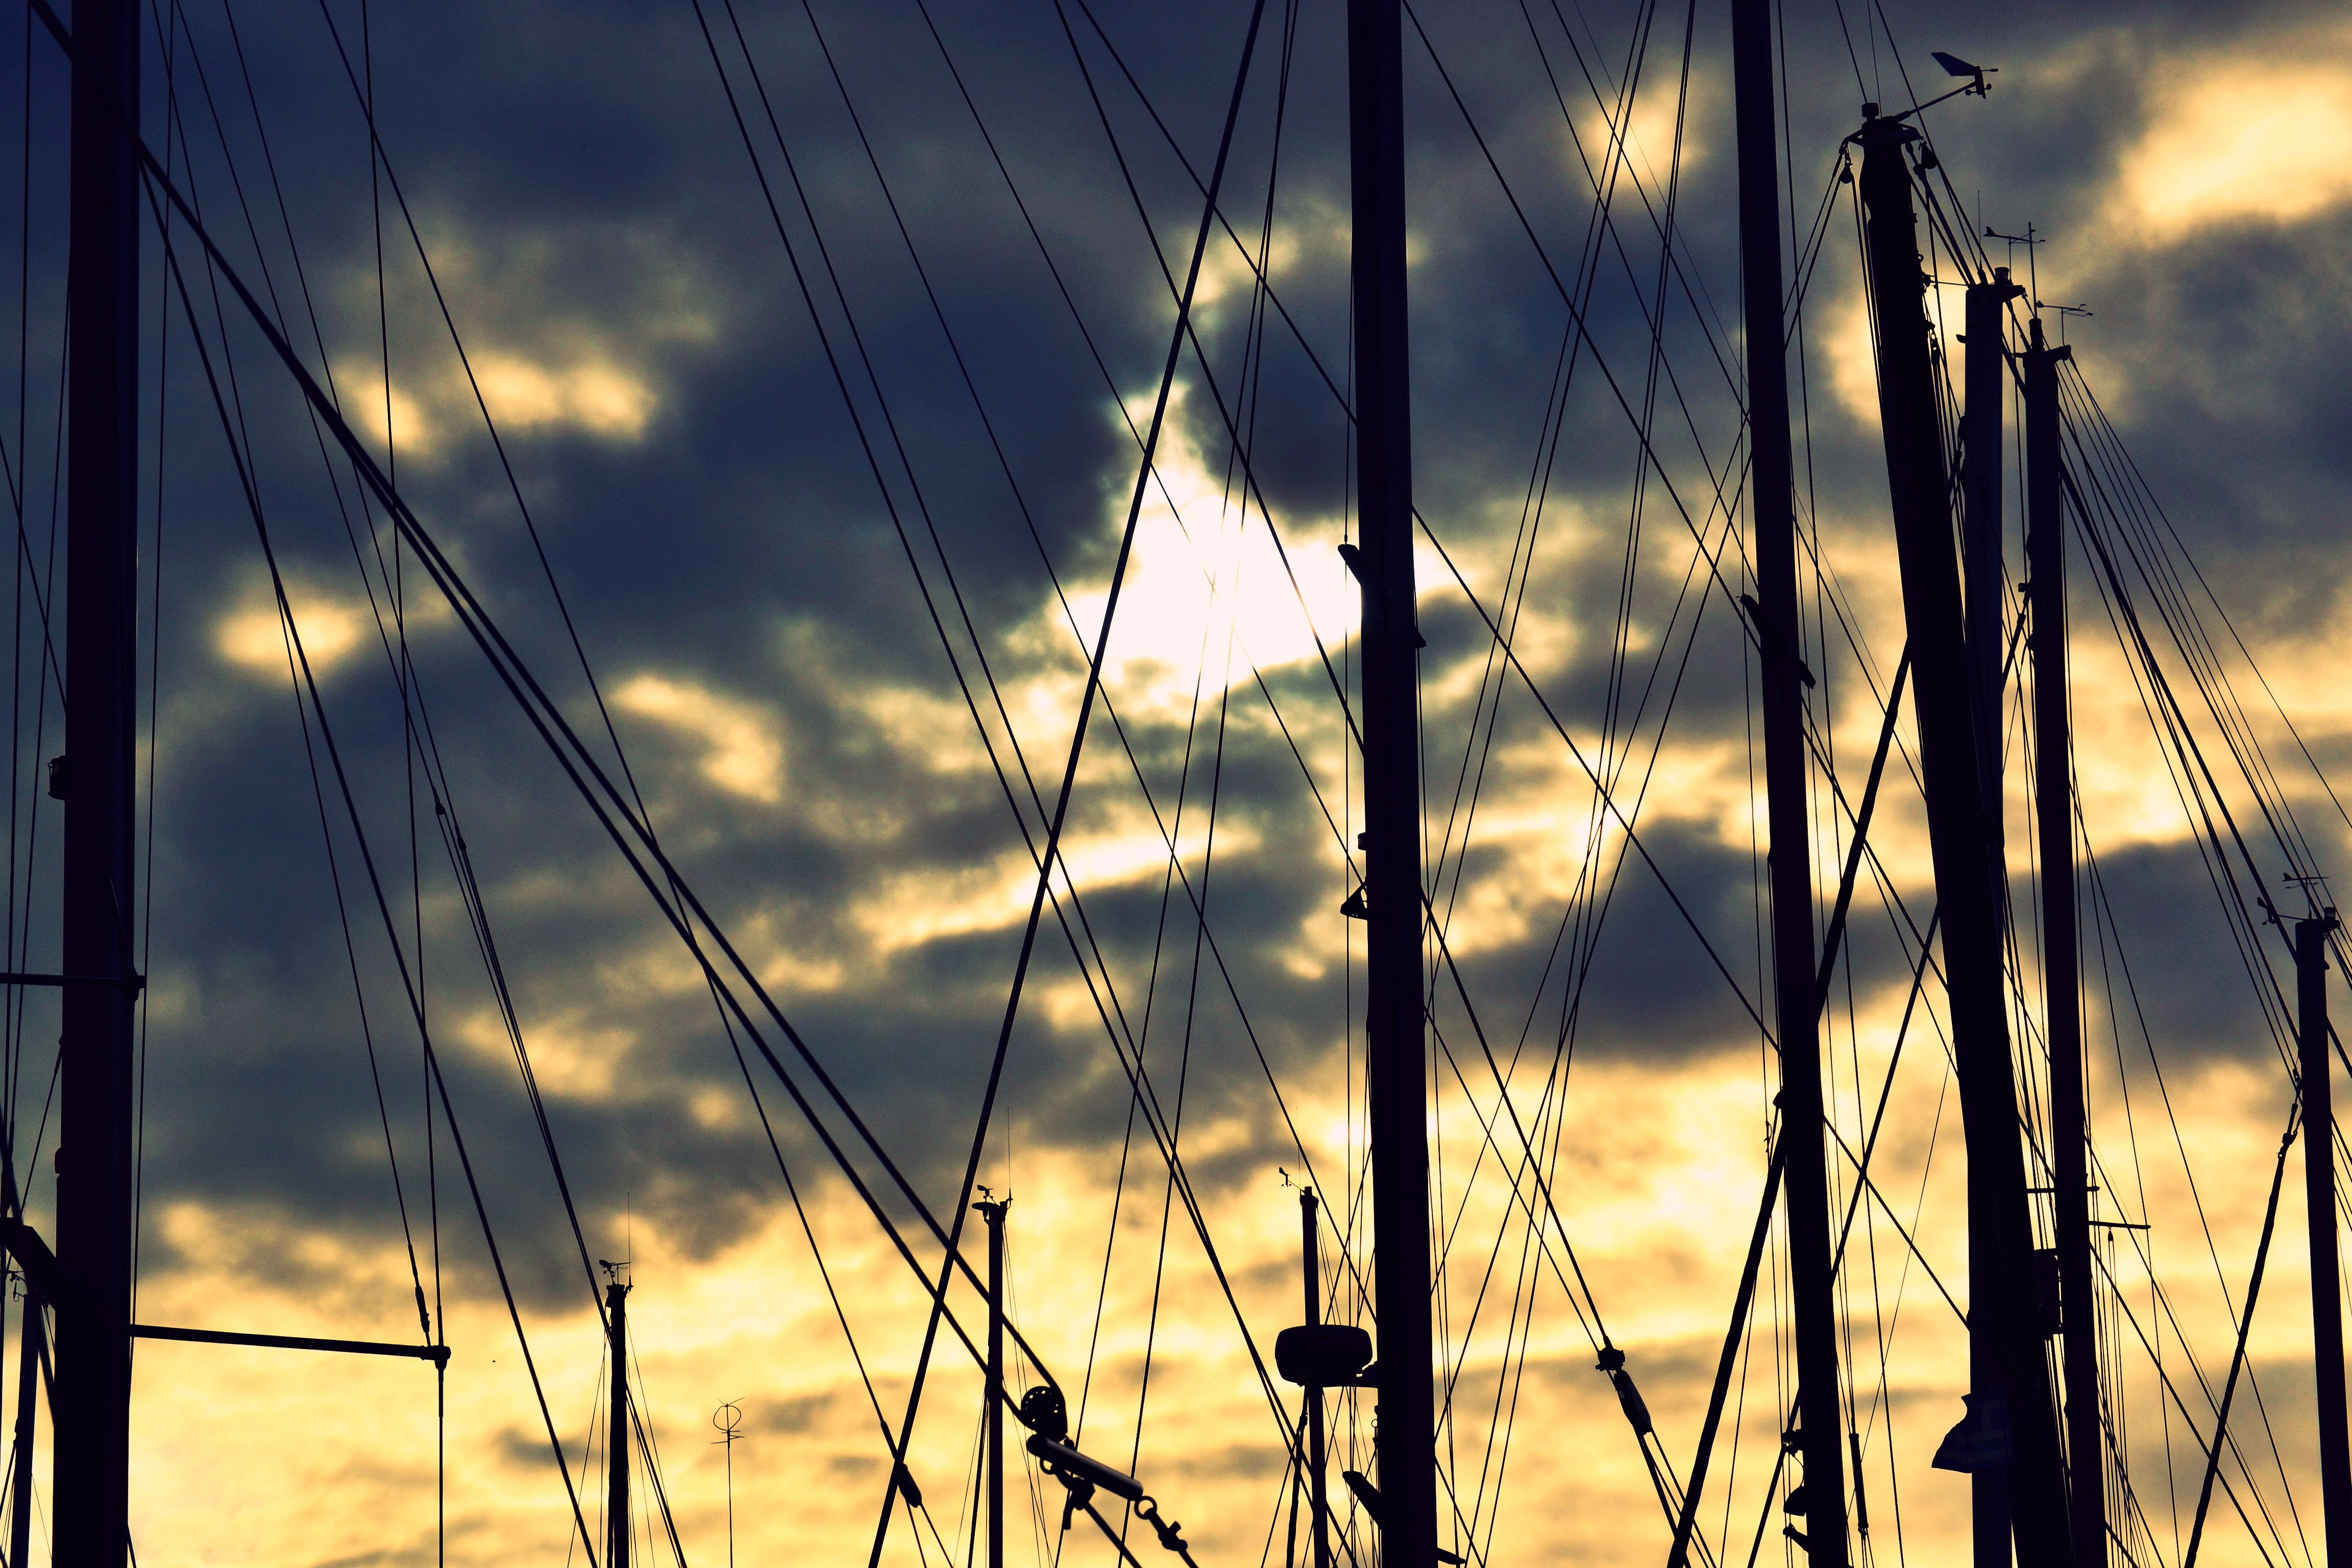 boat-details-boats-clouds-371684